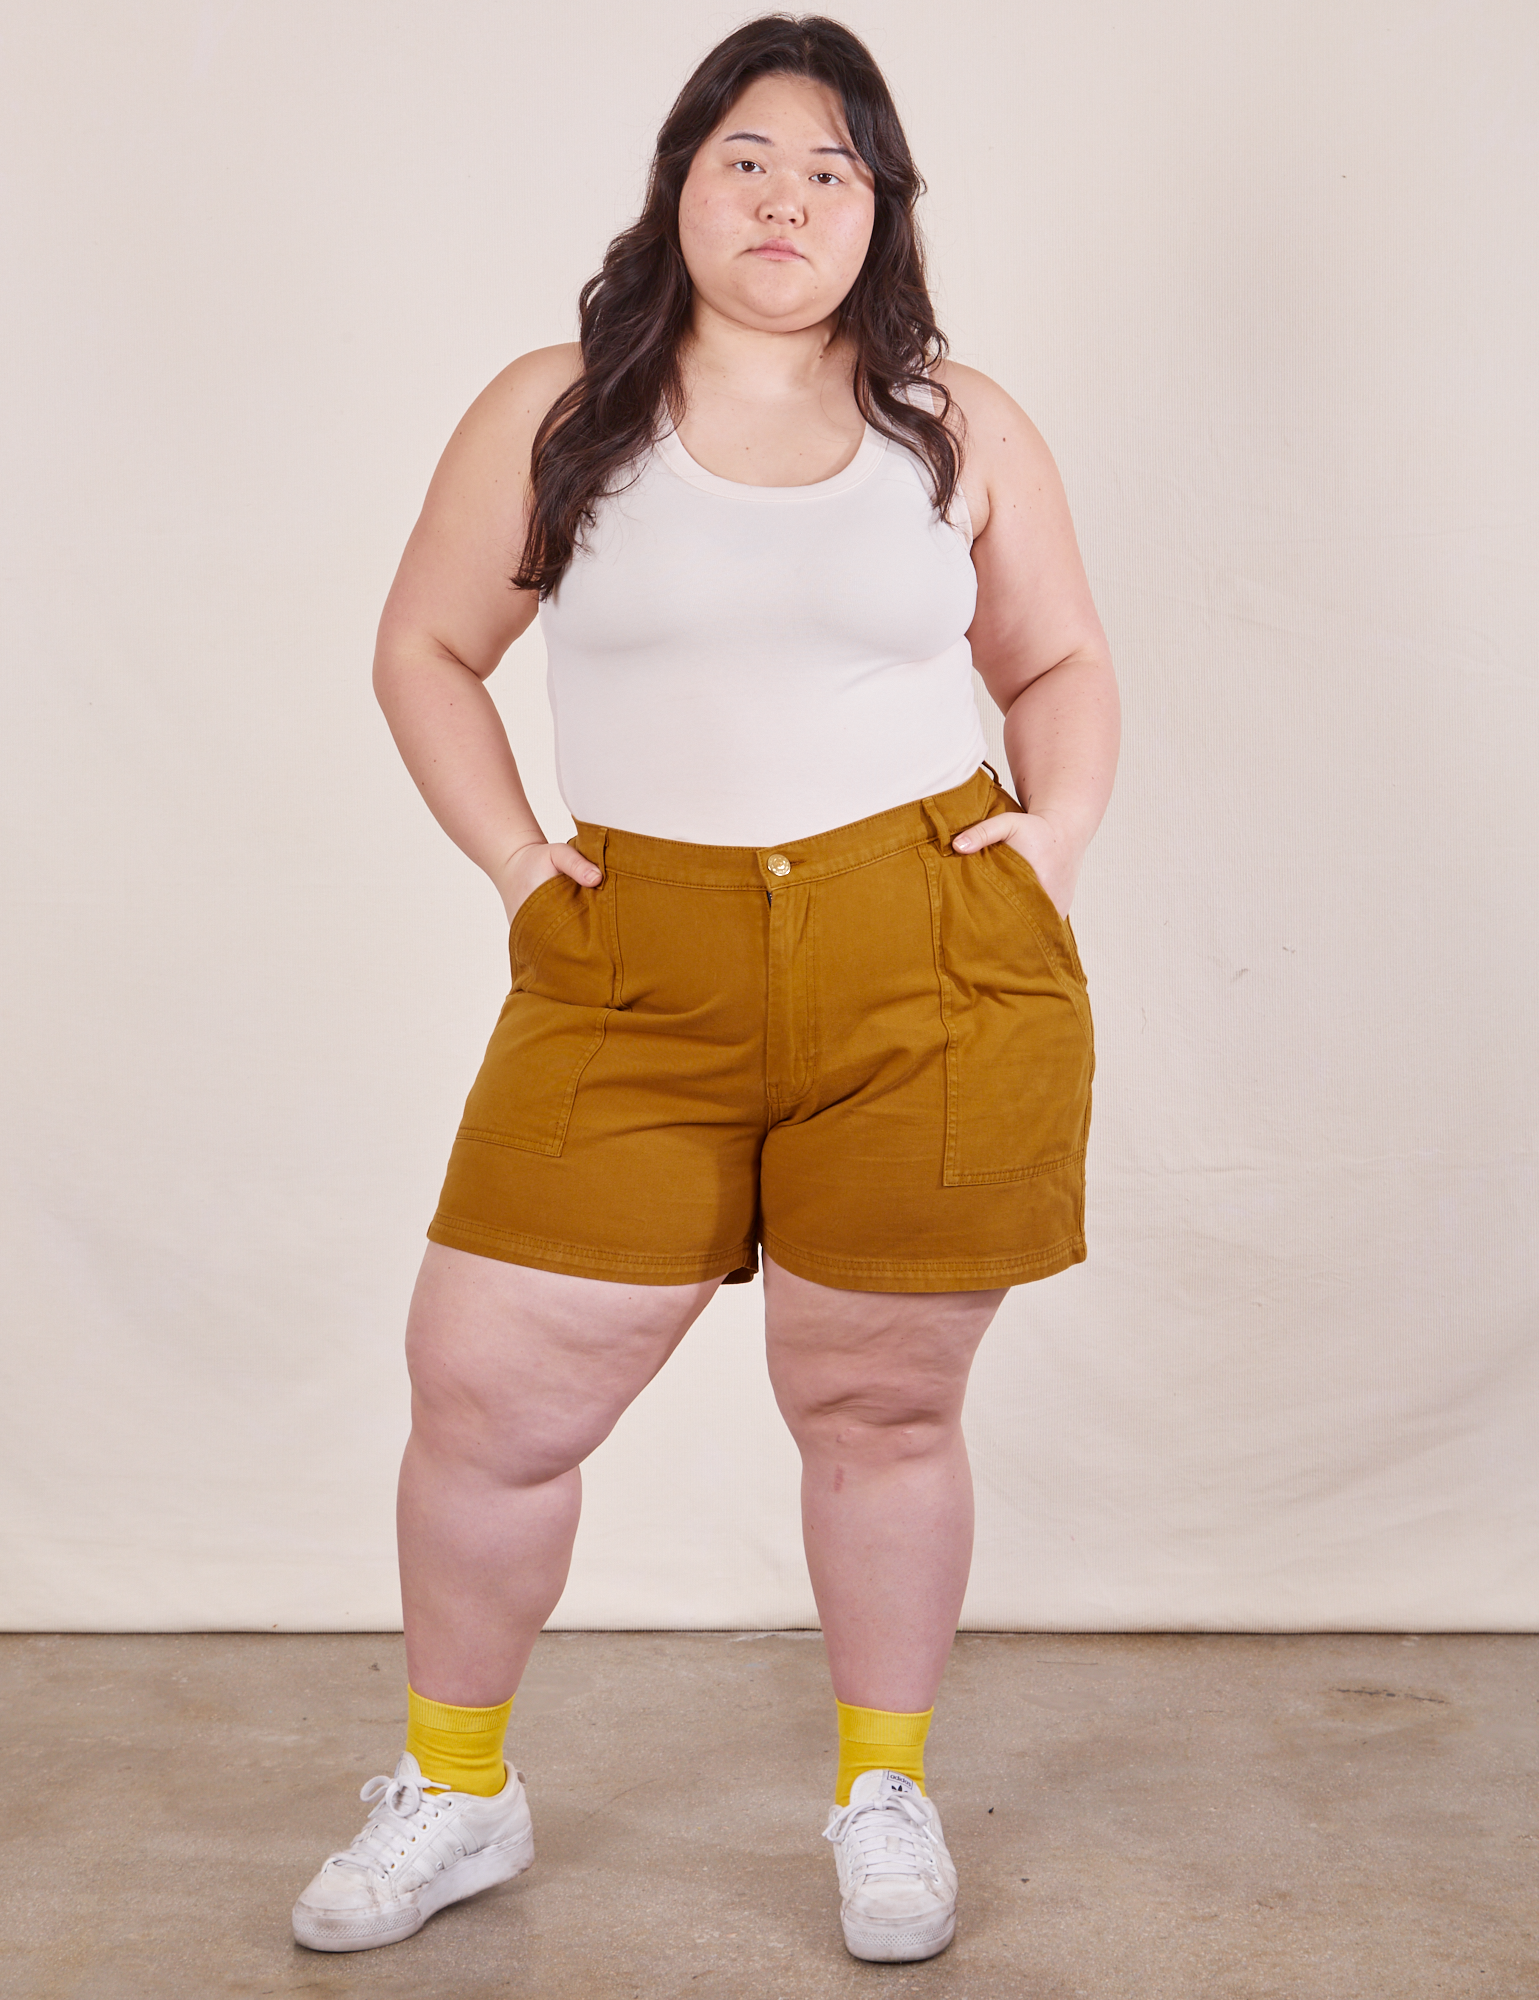 Ashley is wearing Classic Work Shorts in Spicy Mustard and a Tank Top in vintage tee off-white